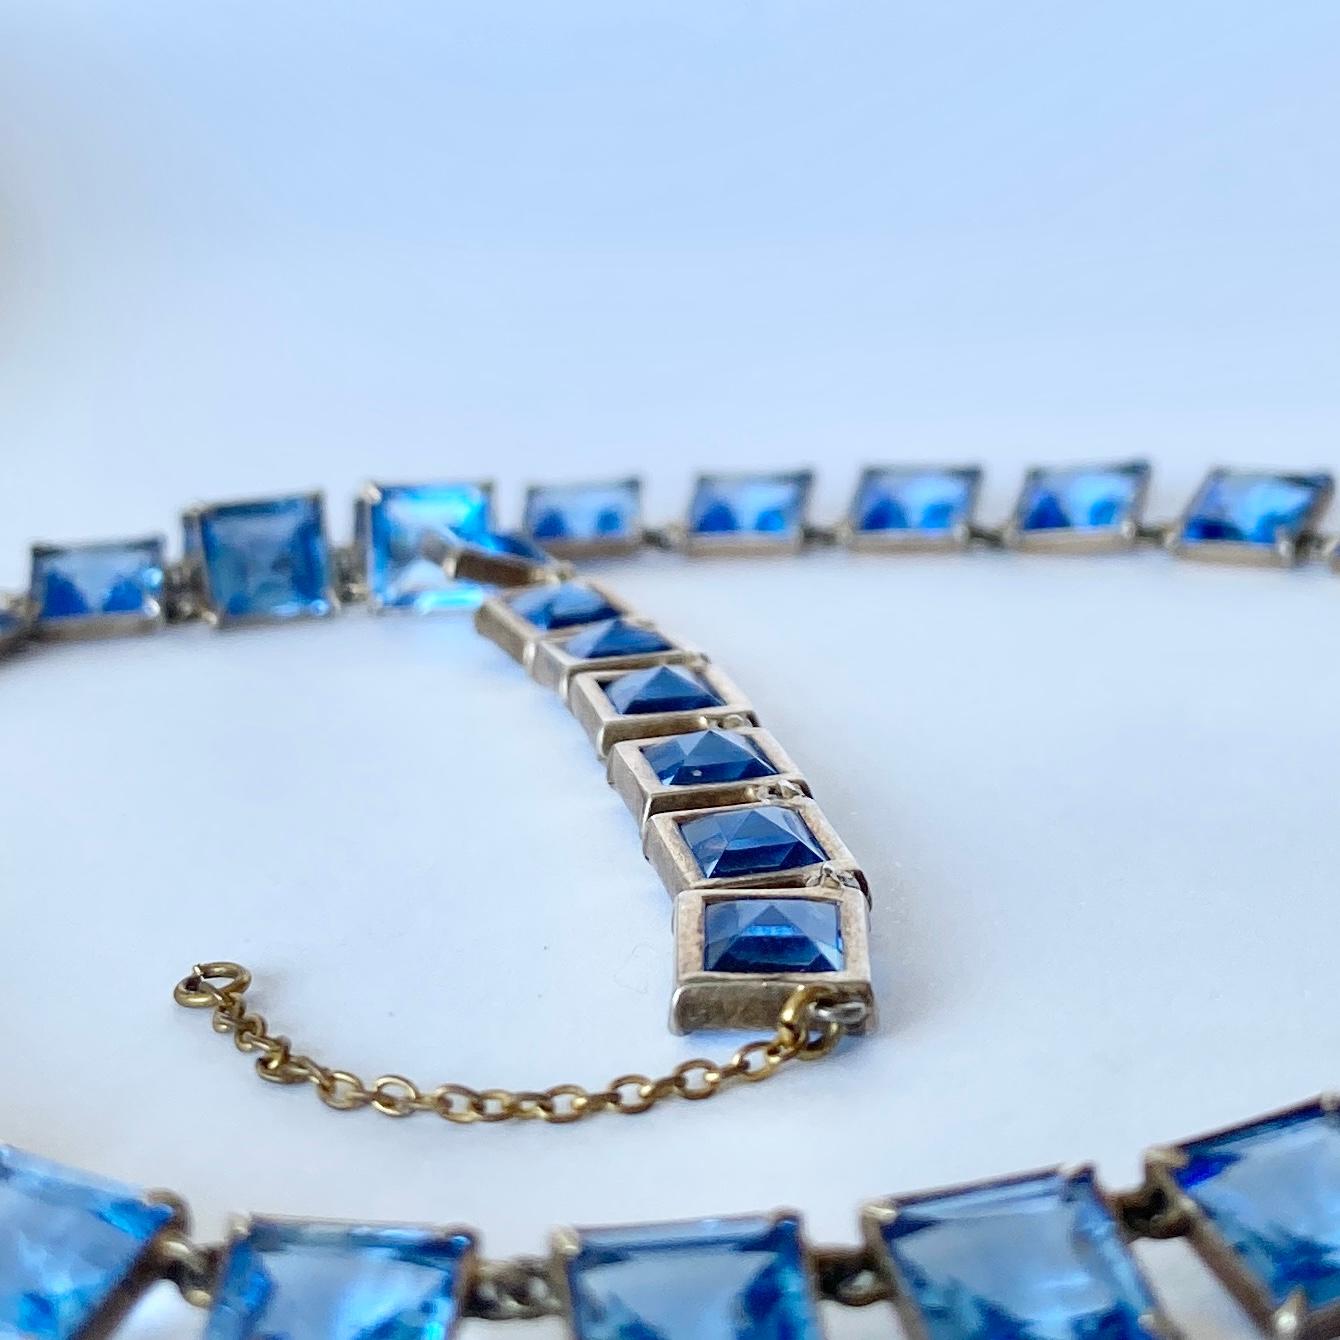 The paste are a gorgeous bright cornflower blue colour which sit beautifully within the simple settings. 

Length: 44cm
Stone Dimensions: 7x7mm

Weight: 20g